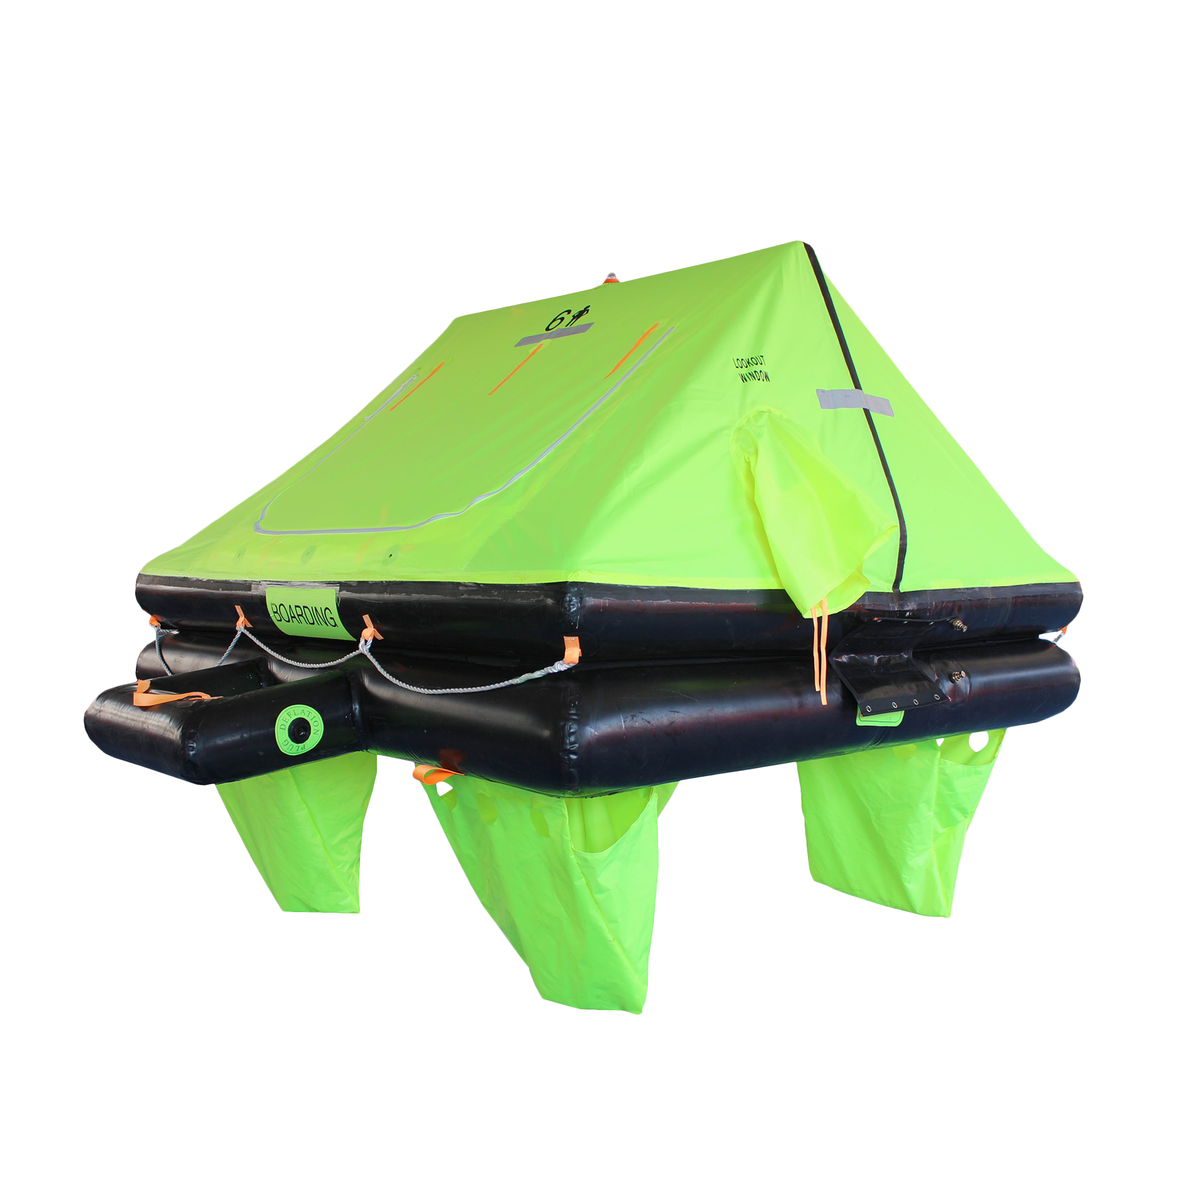 Superior Offshore Stream Recreational Life Raft – Life Raft and